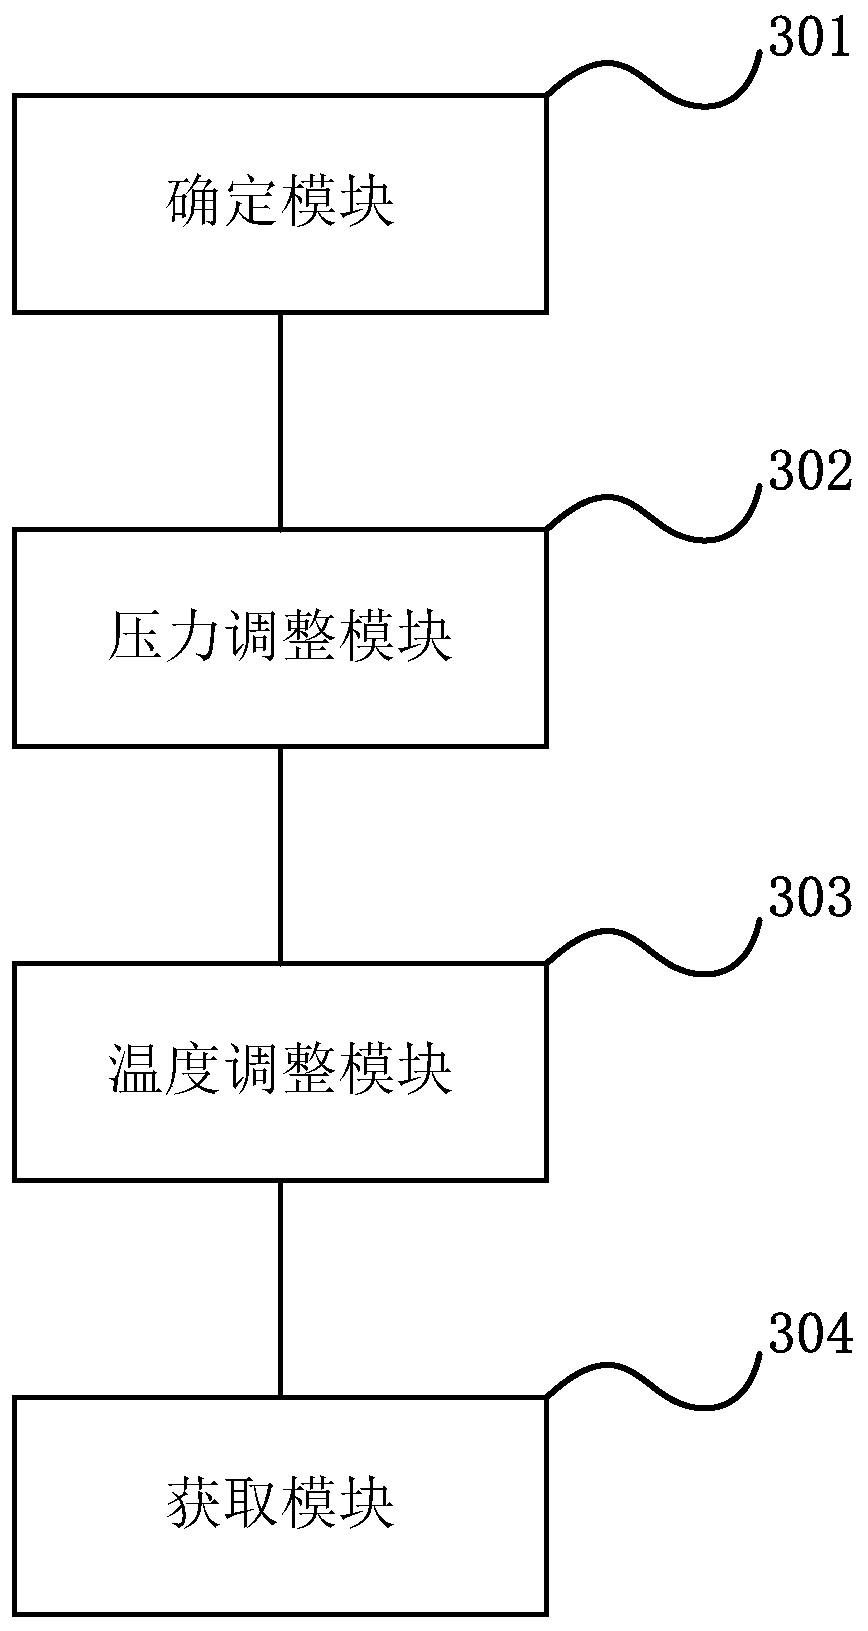 Life test method and equipment for automobile cooling system part